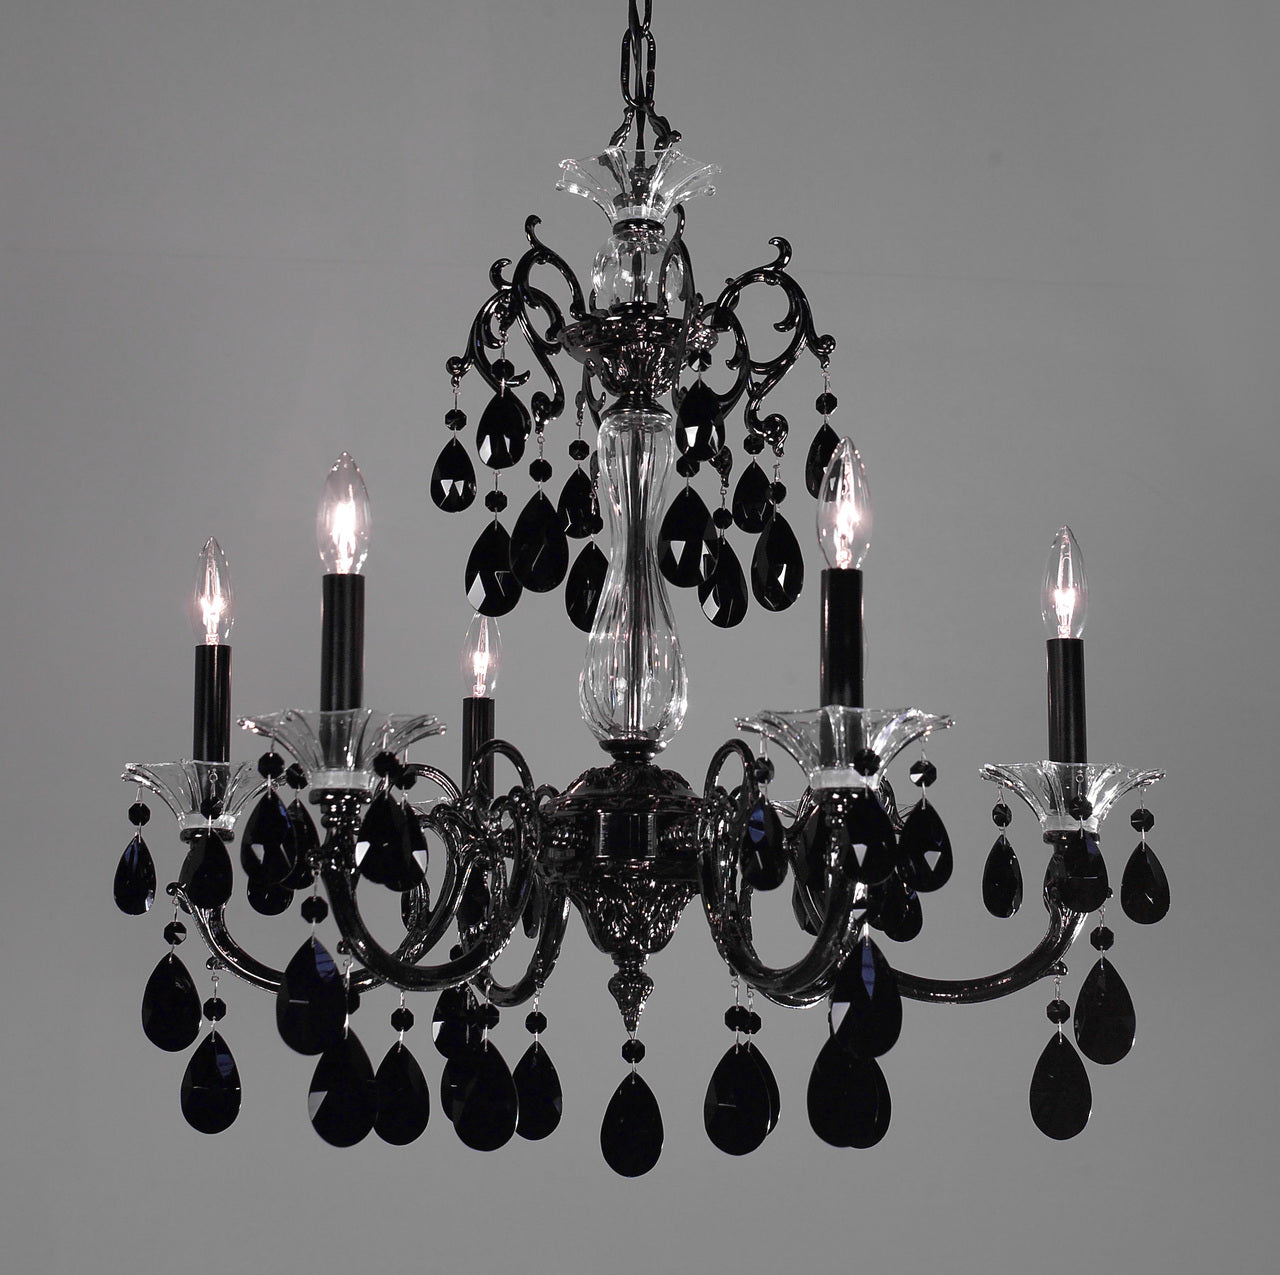 Classic Lighting 57056 EP CP Via Lombardi Crystal Chandelier in Ebony Pearl (Imported from Spain)